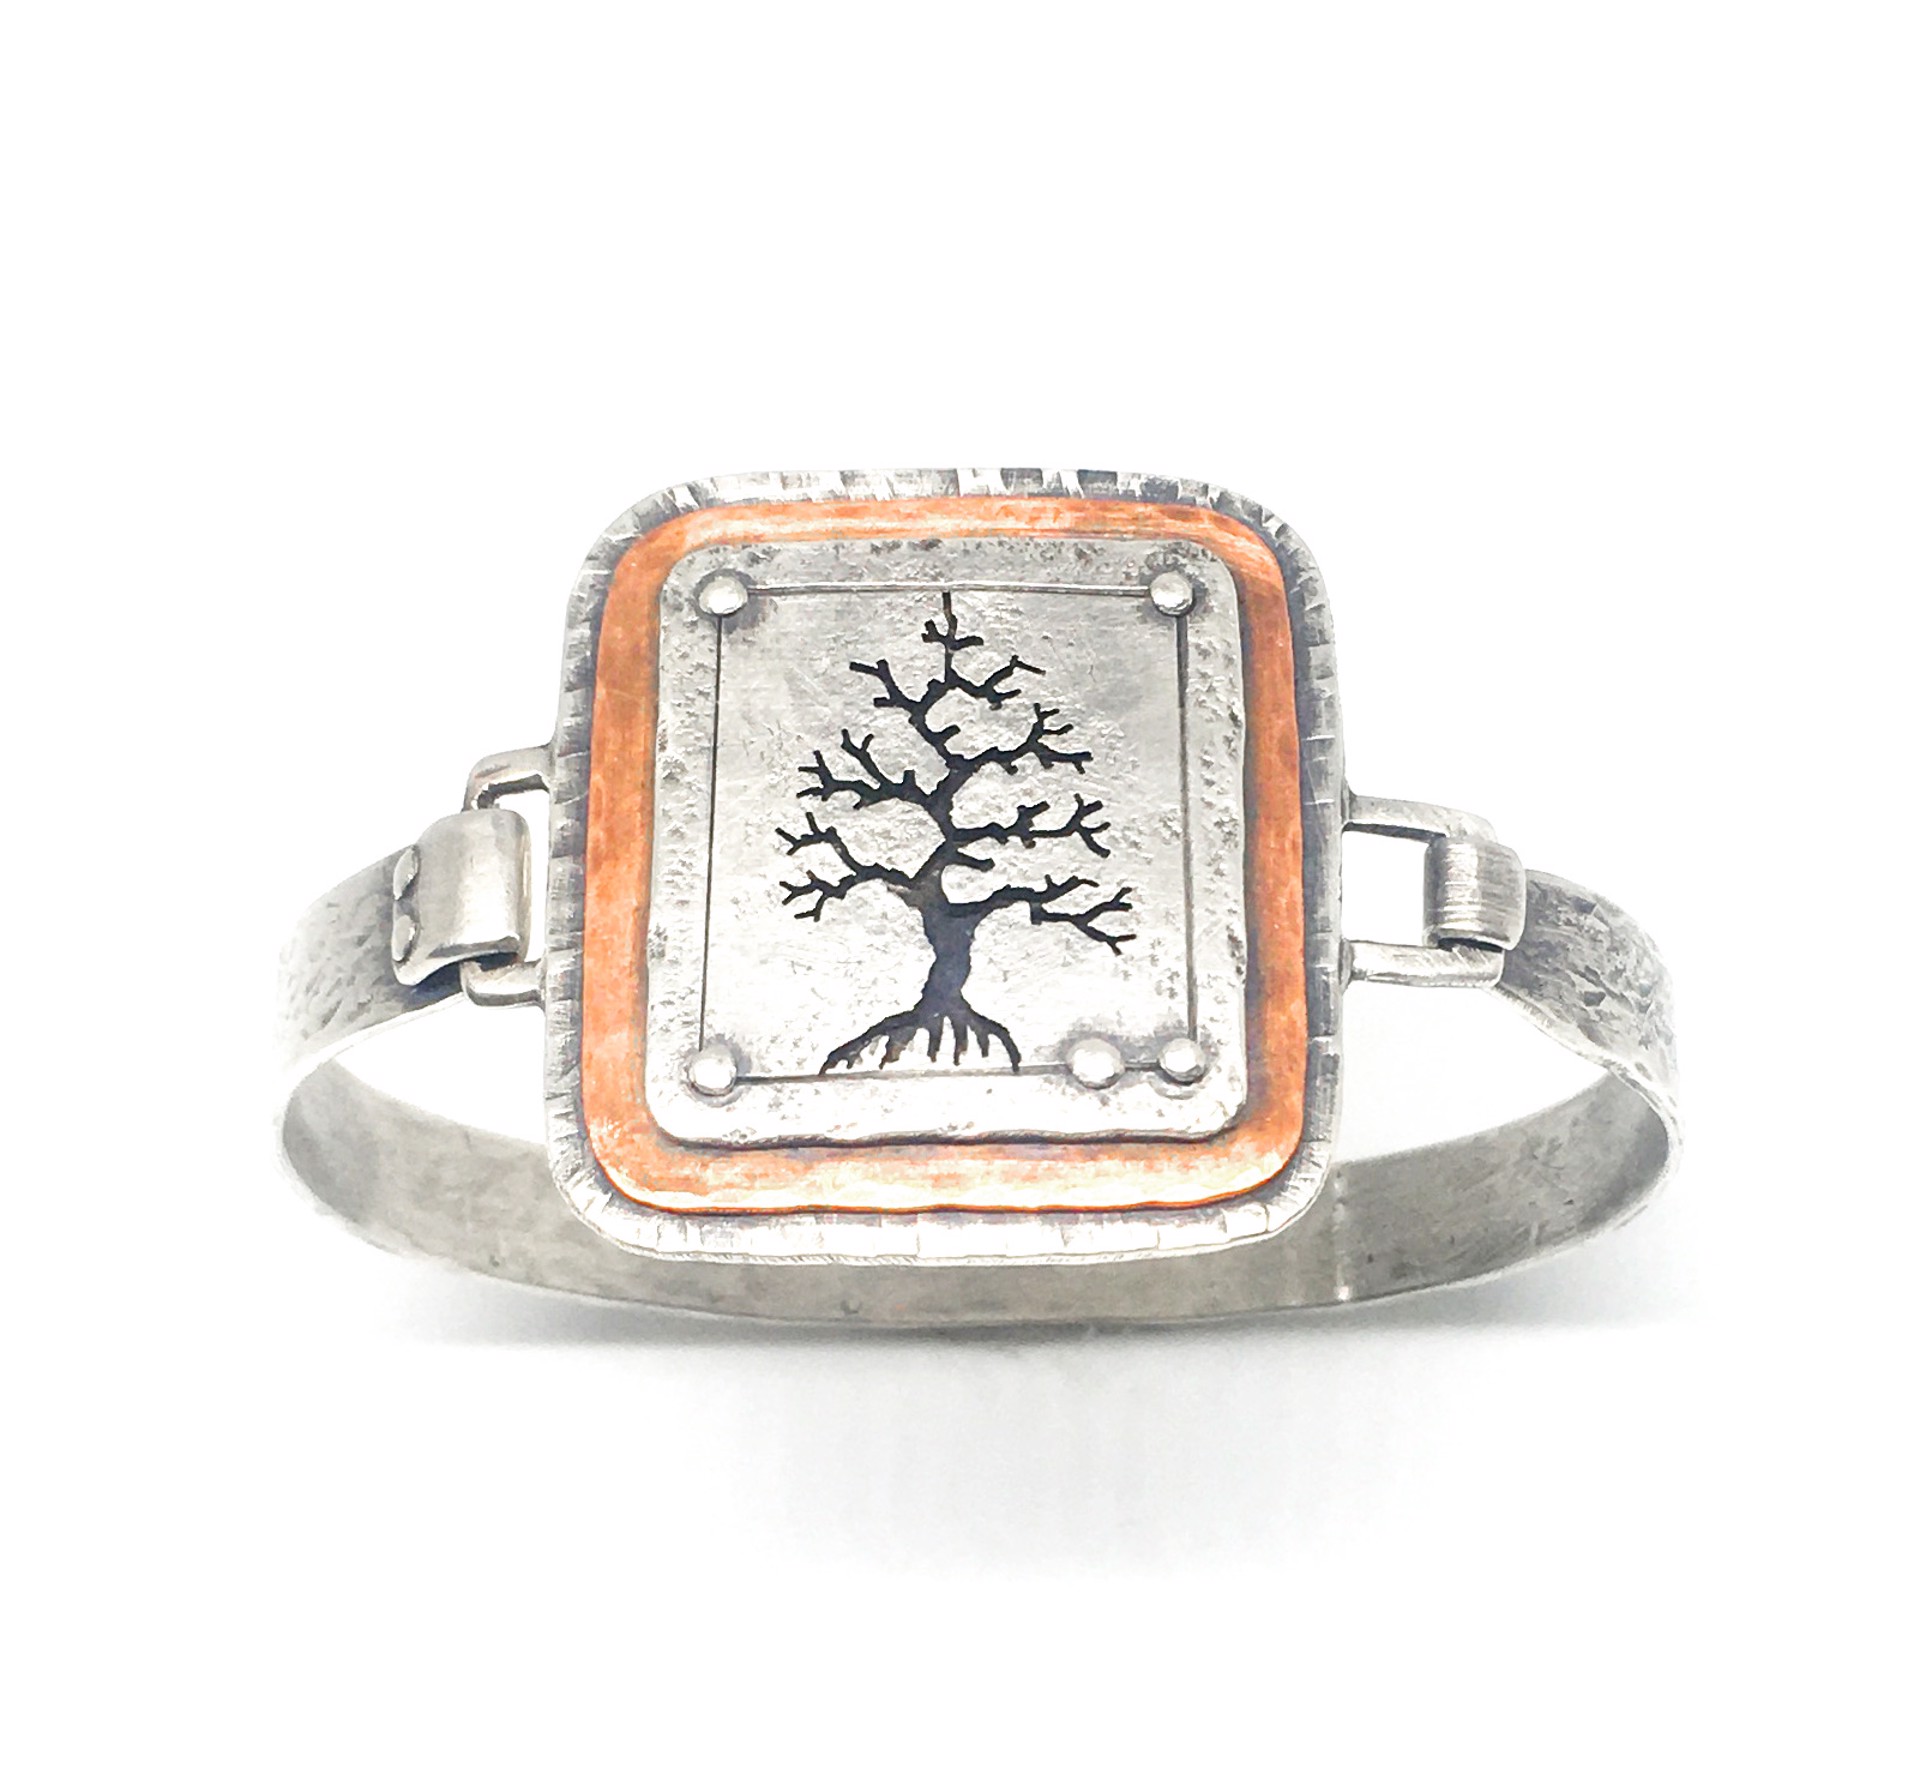 "Arvore"  Handmade Silver & Copper Riveted Hinged Tree Cuff by Grace Ashford